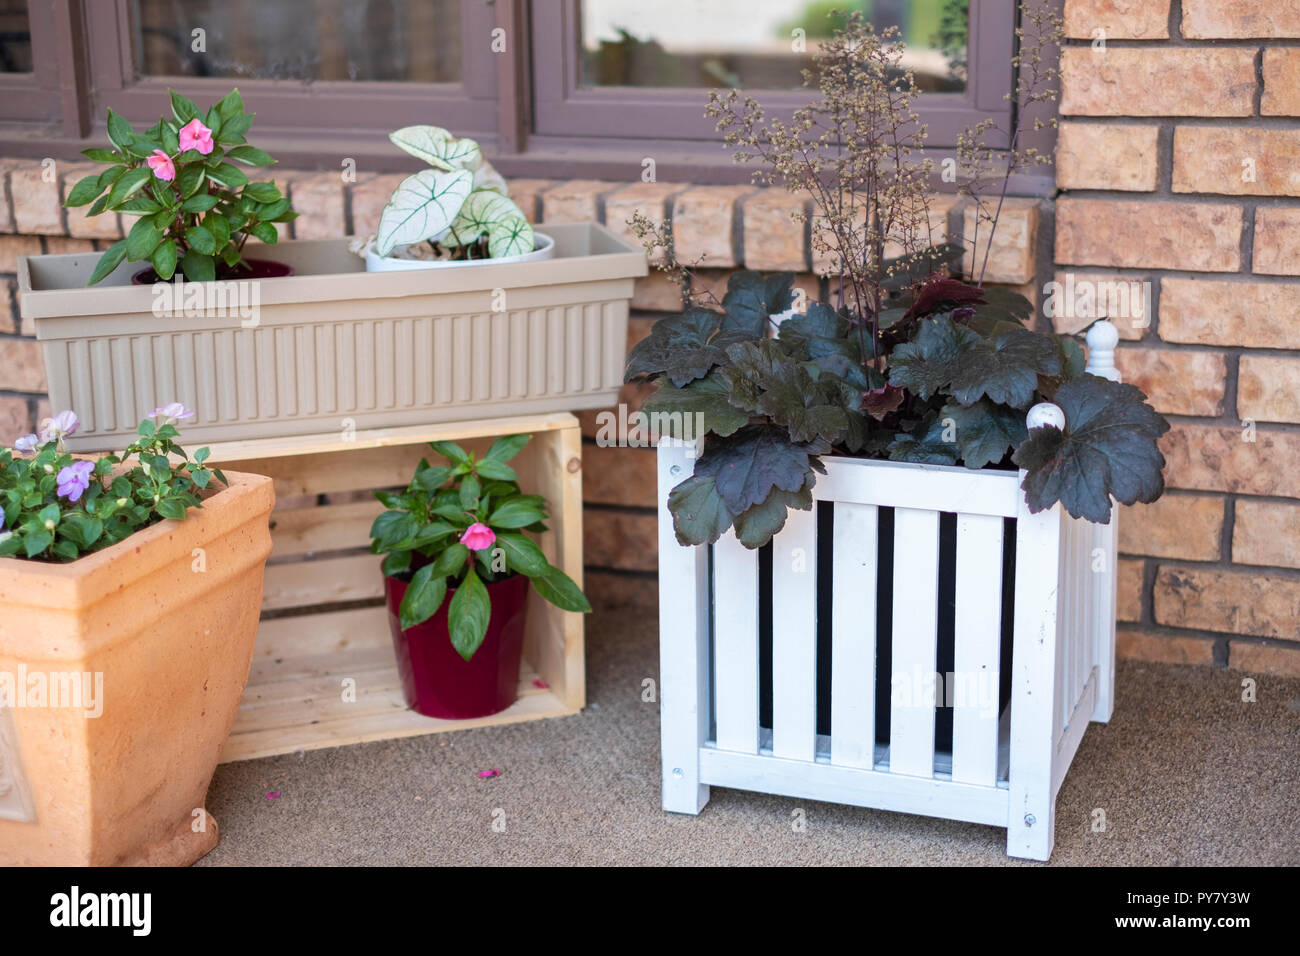 Flower boxes and pots in a porch arrangement in summer. Kansas, USA. Stock Photo